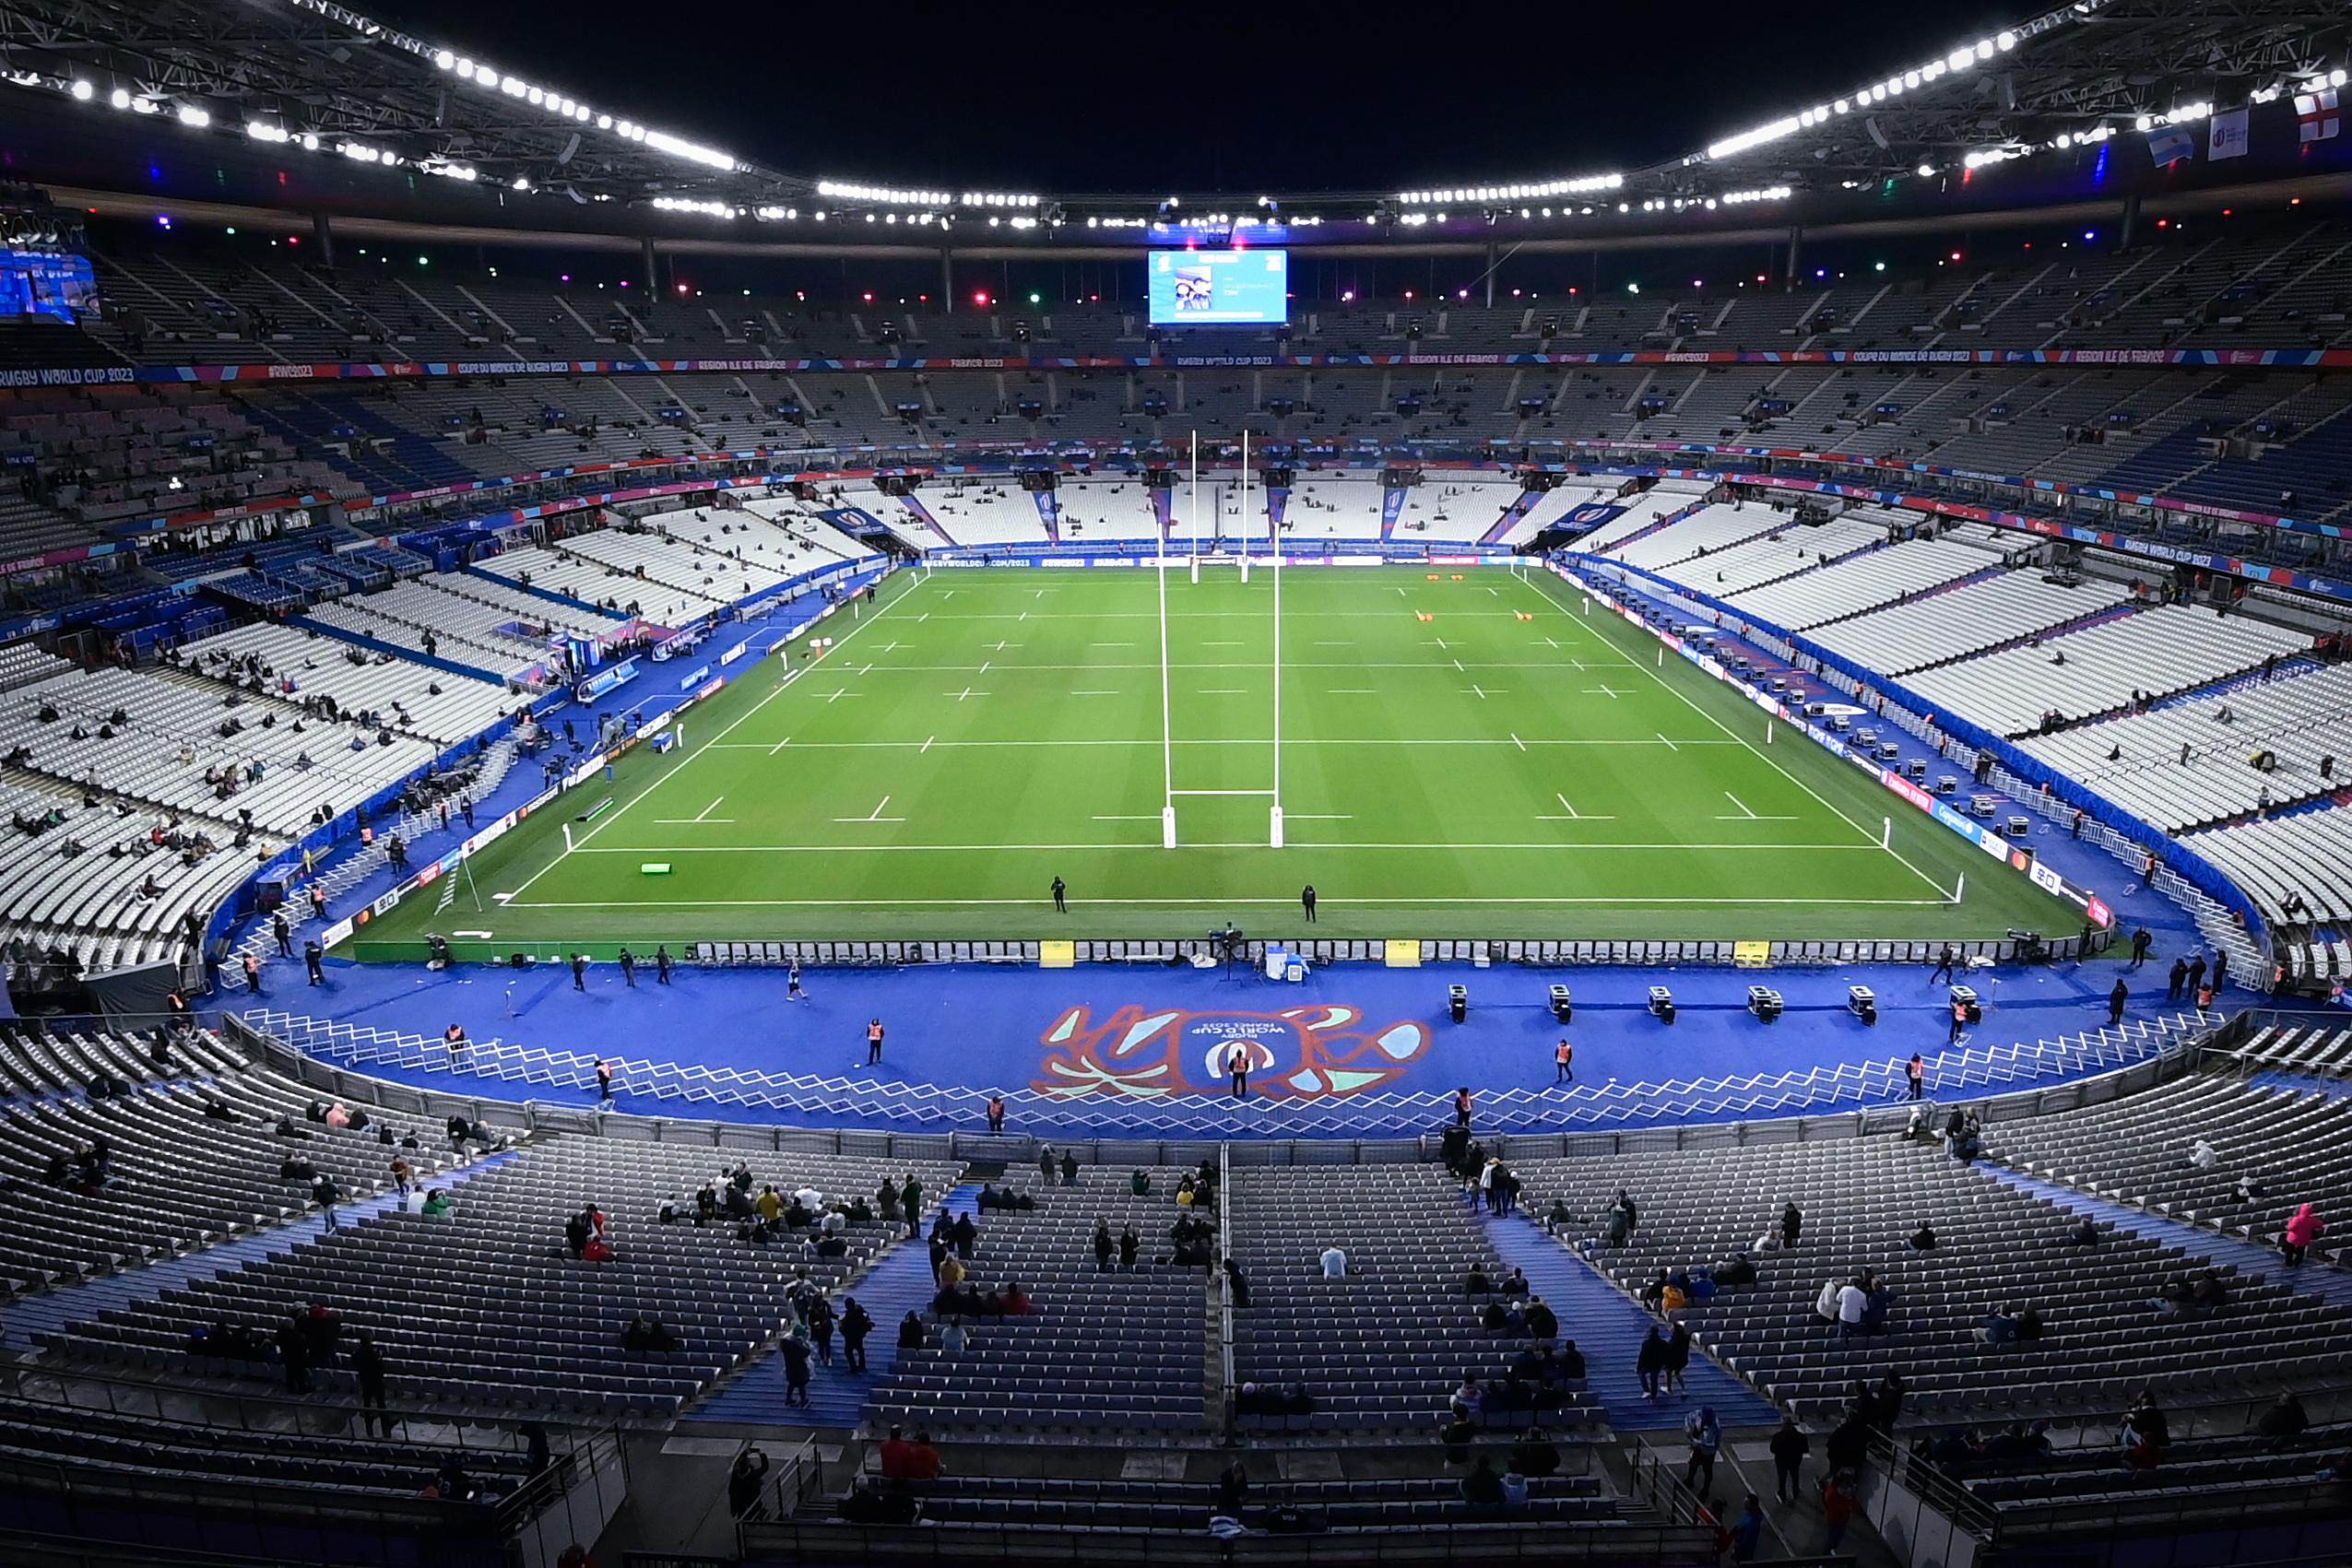 Paris 2024 Olympics: purple track, 5G, giant screens, before the Games, the Stade de France is getting a makeover